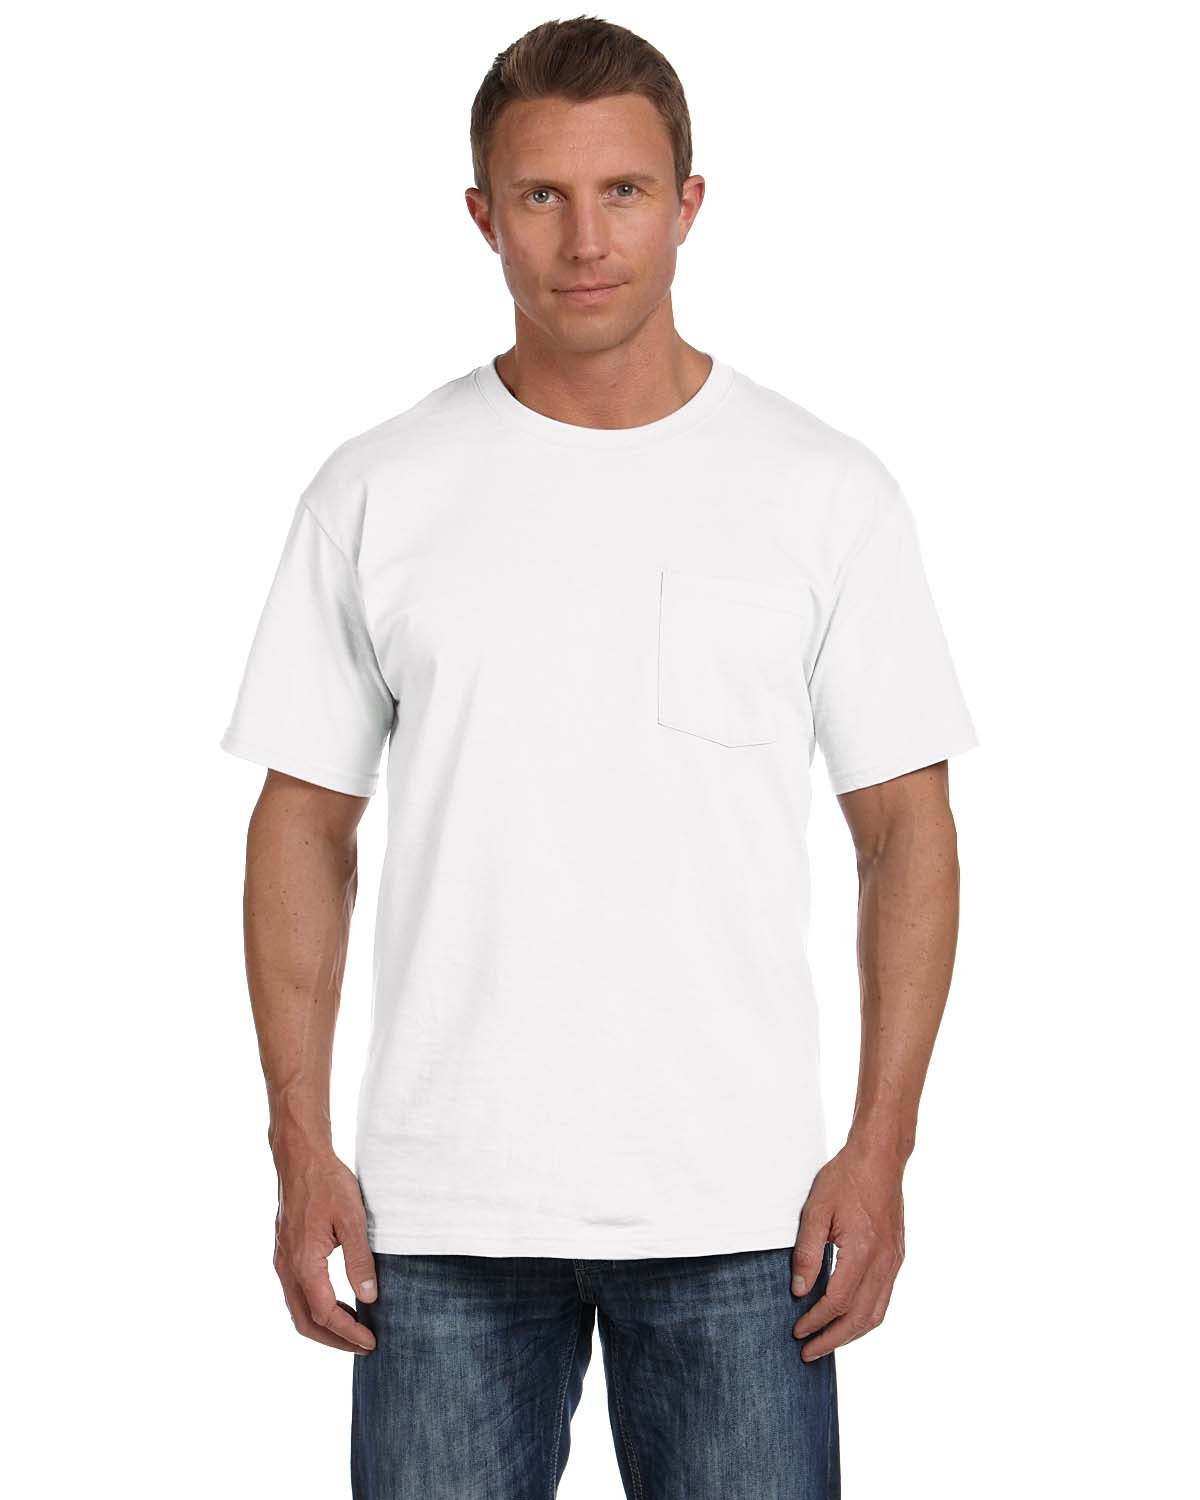 Adult Hd Cotton™ Pocket T-Shirt-Fruit of the Loom